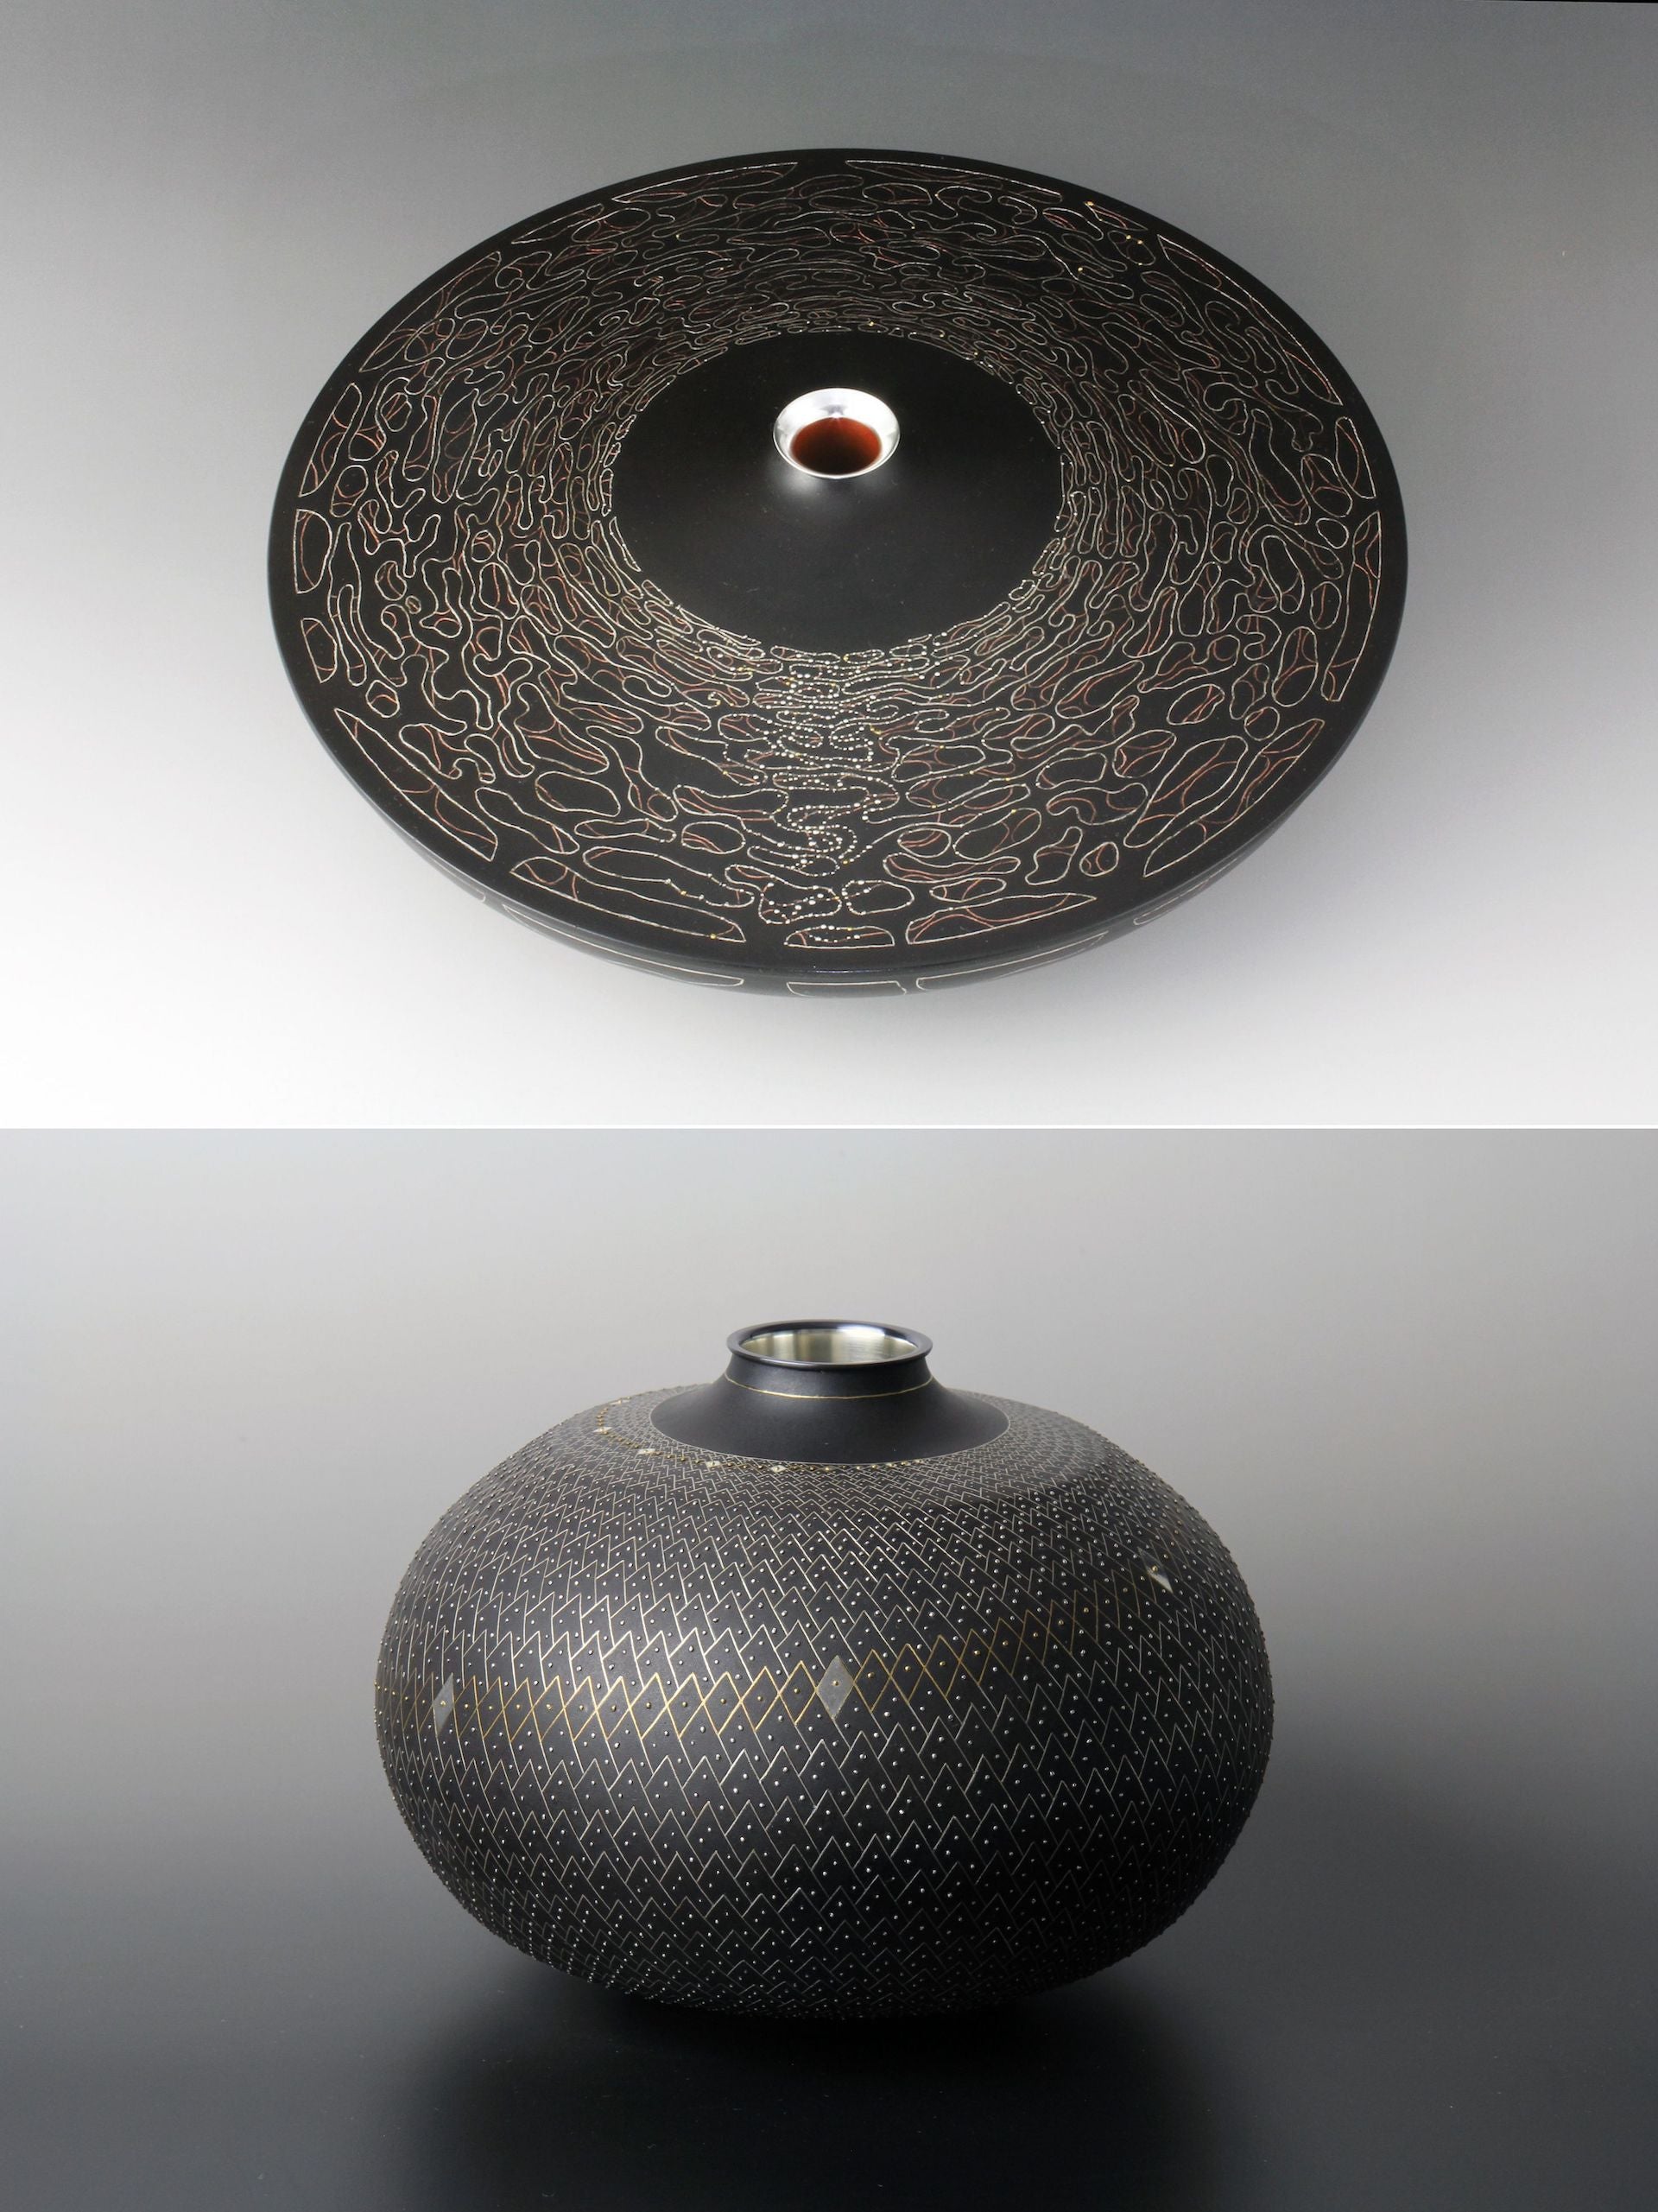 Flower Vase Minamozuki (Reflection of the Moon on Water), 2015, and Flower Vase Spiral Shell, 2017, by Hara Satoshi. Photos © Onishi Gallery